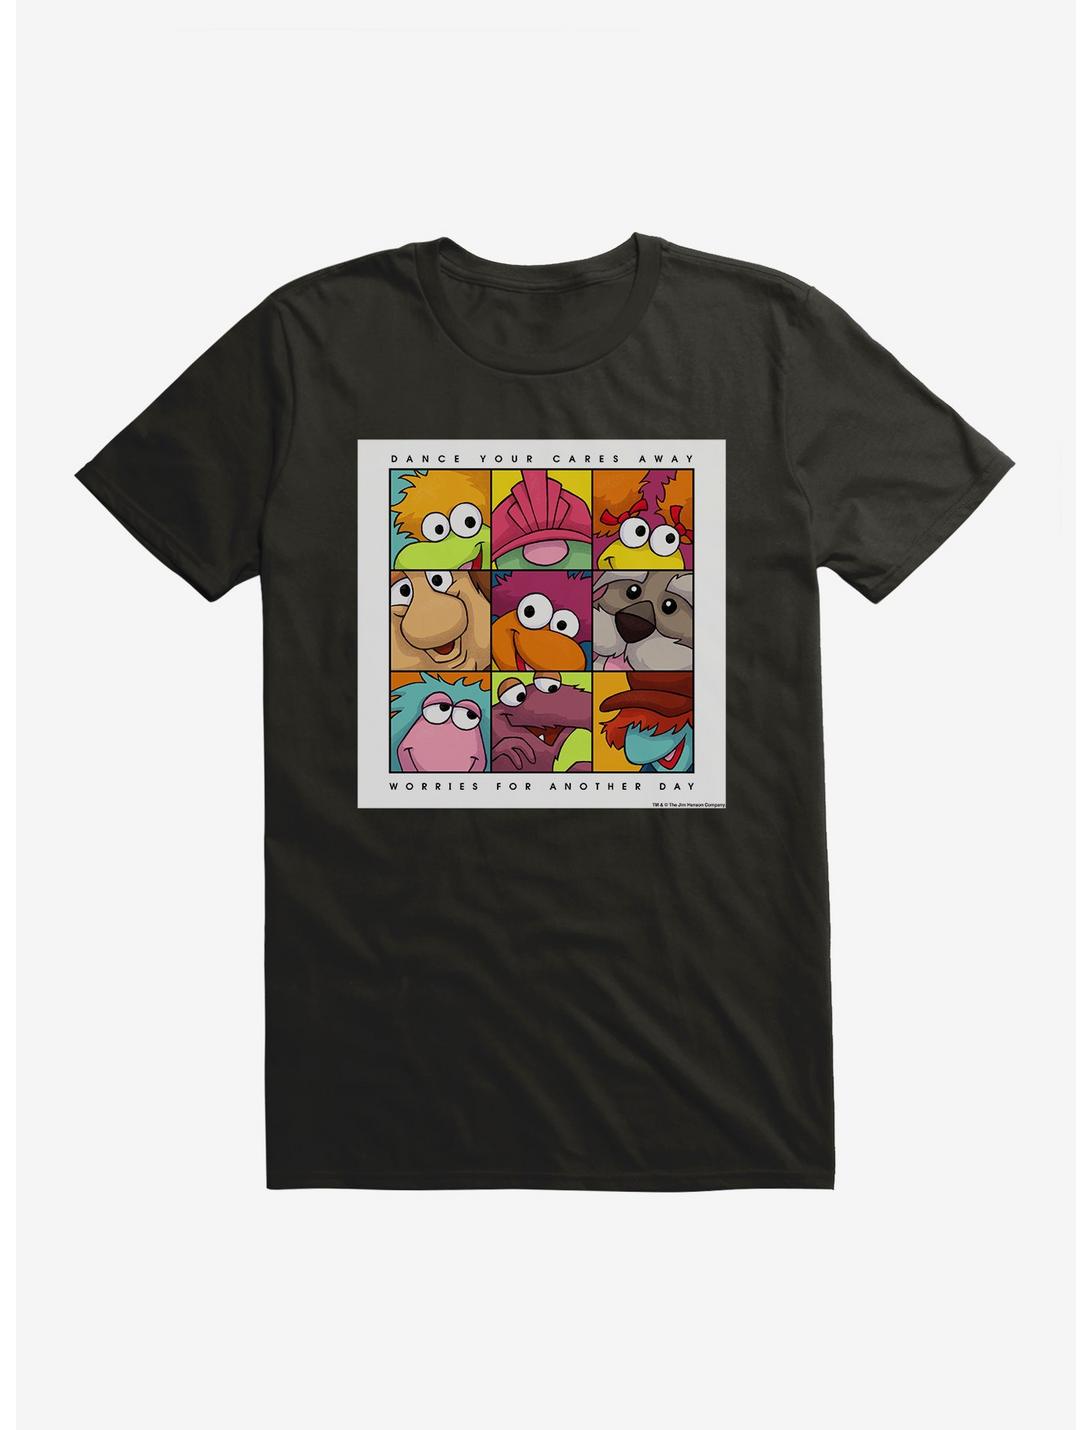 Jim Henson Another Day T-Shirt, , hi-res